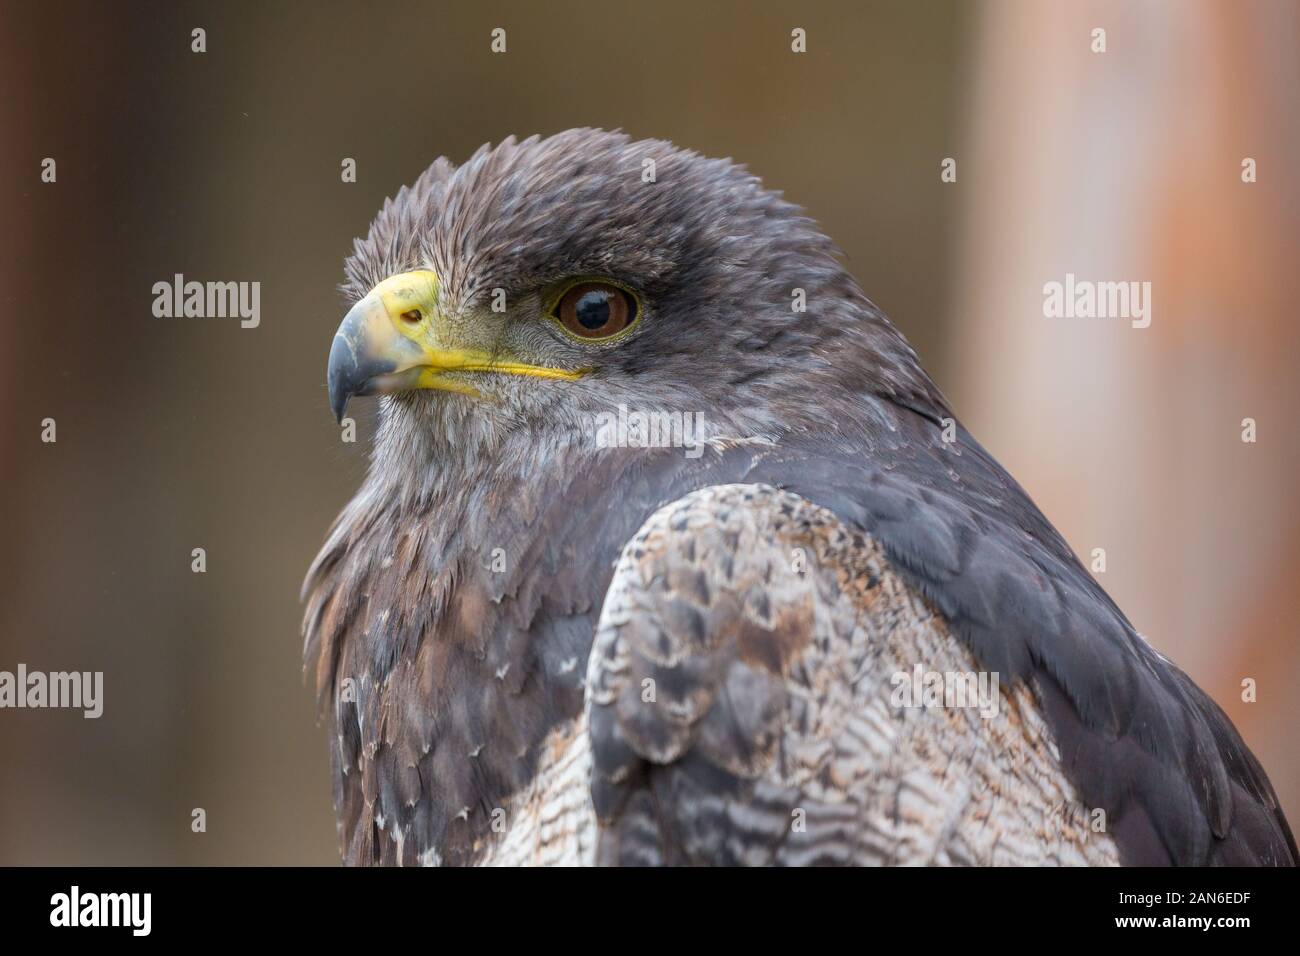 Side view on head of Aguja or black-chested buzzard-eagle (latin name Geranoaetus melanoleucus). Wth detailed view on eye and feathers around. Stock Photo